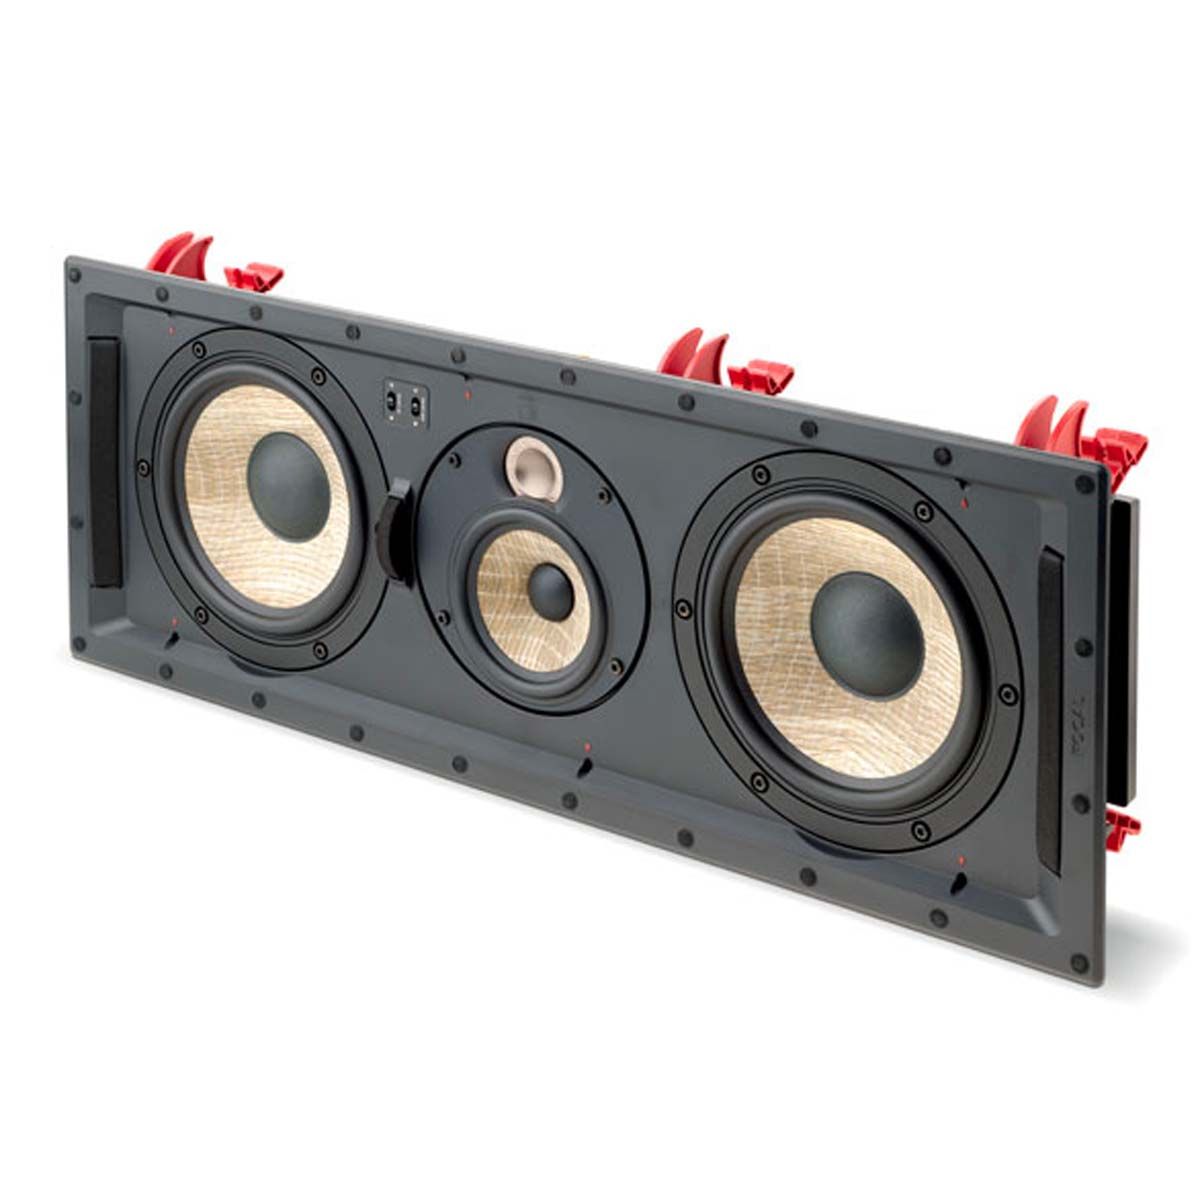 Focal 300 IWLCR6 In-Wall Loudspeaker - Each front view in horizontal configuration